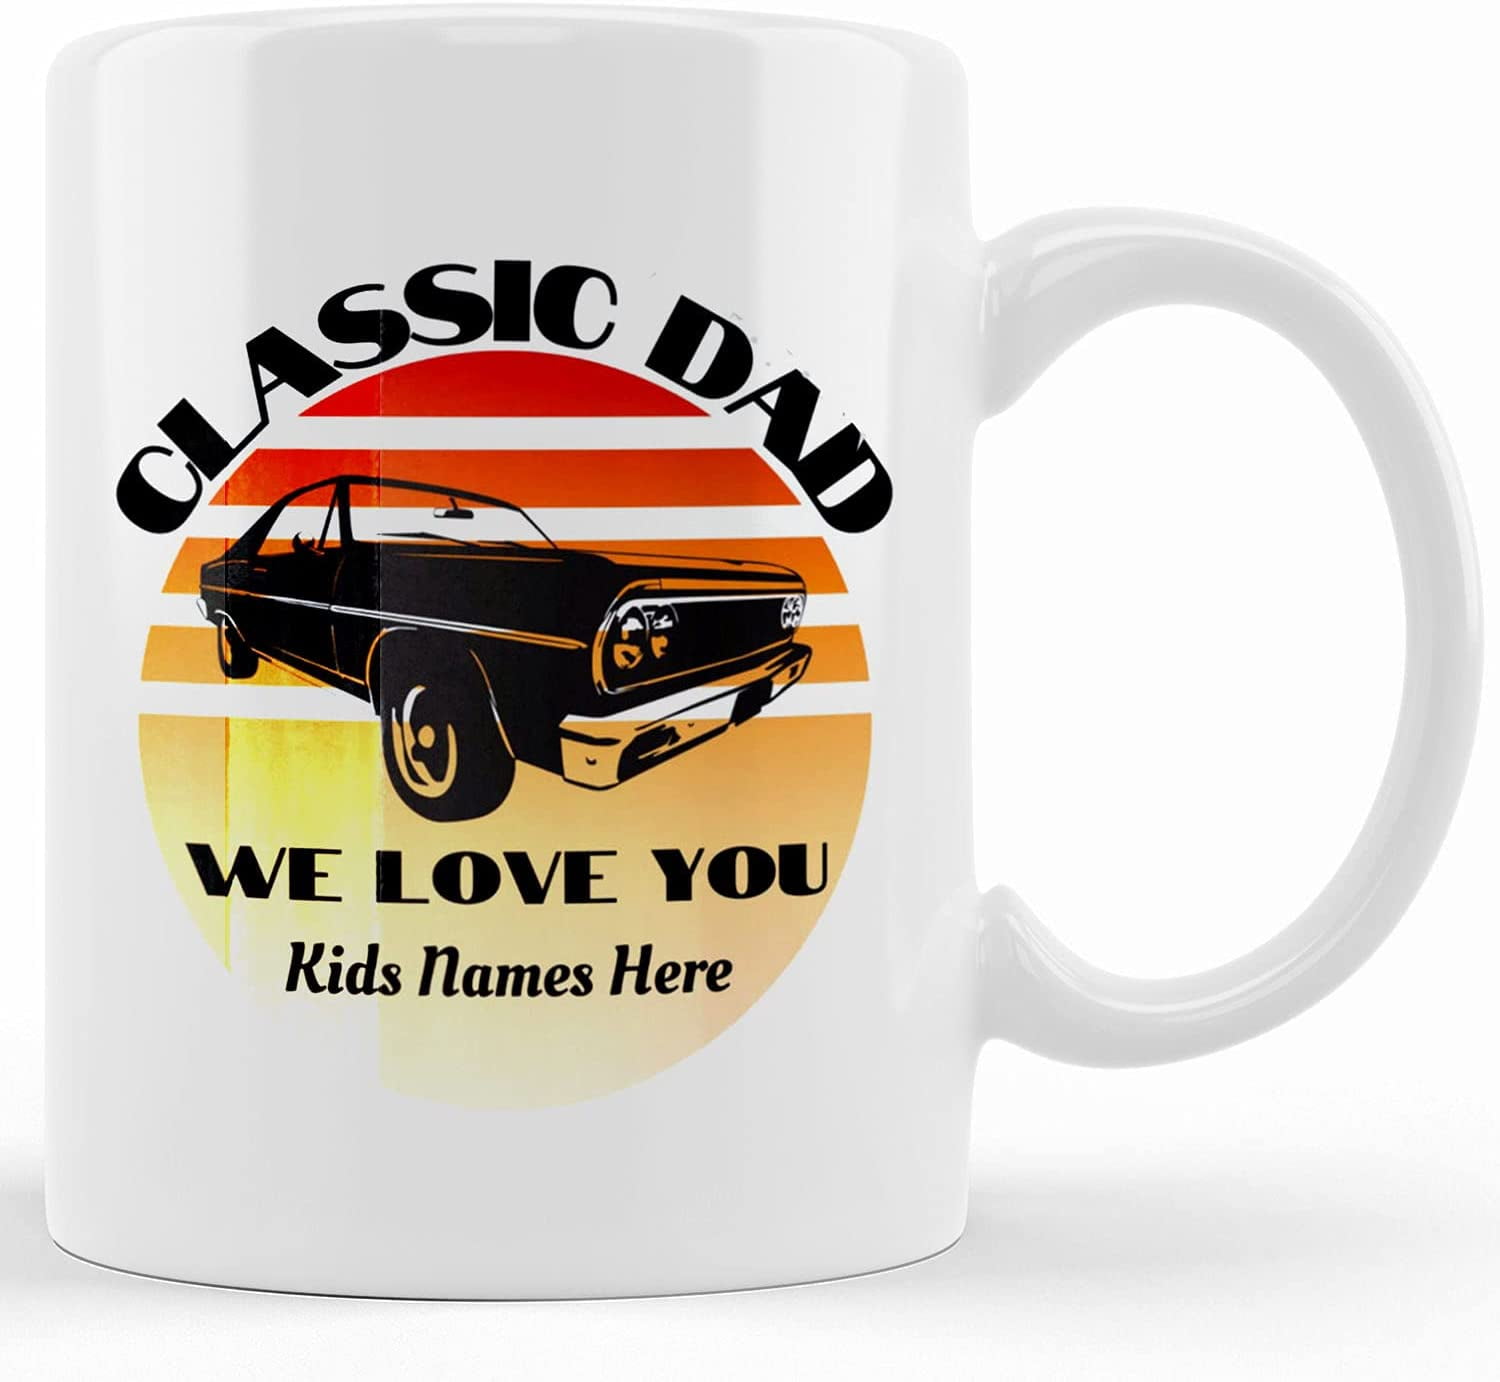 BMW Car Mug Personalized Your Name Gift Dad Father - Inspire Uplift